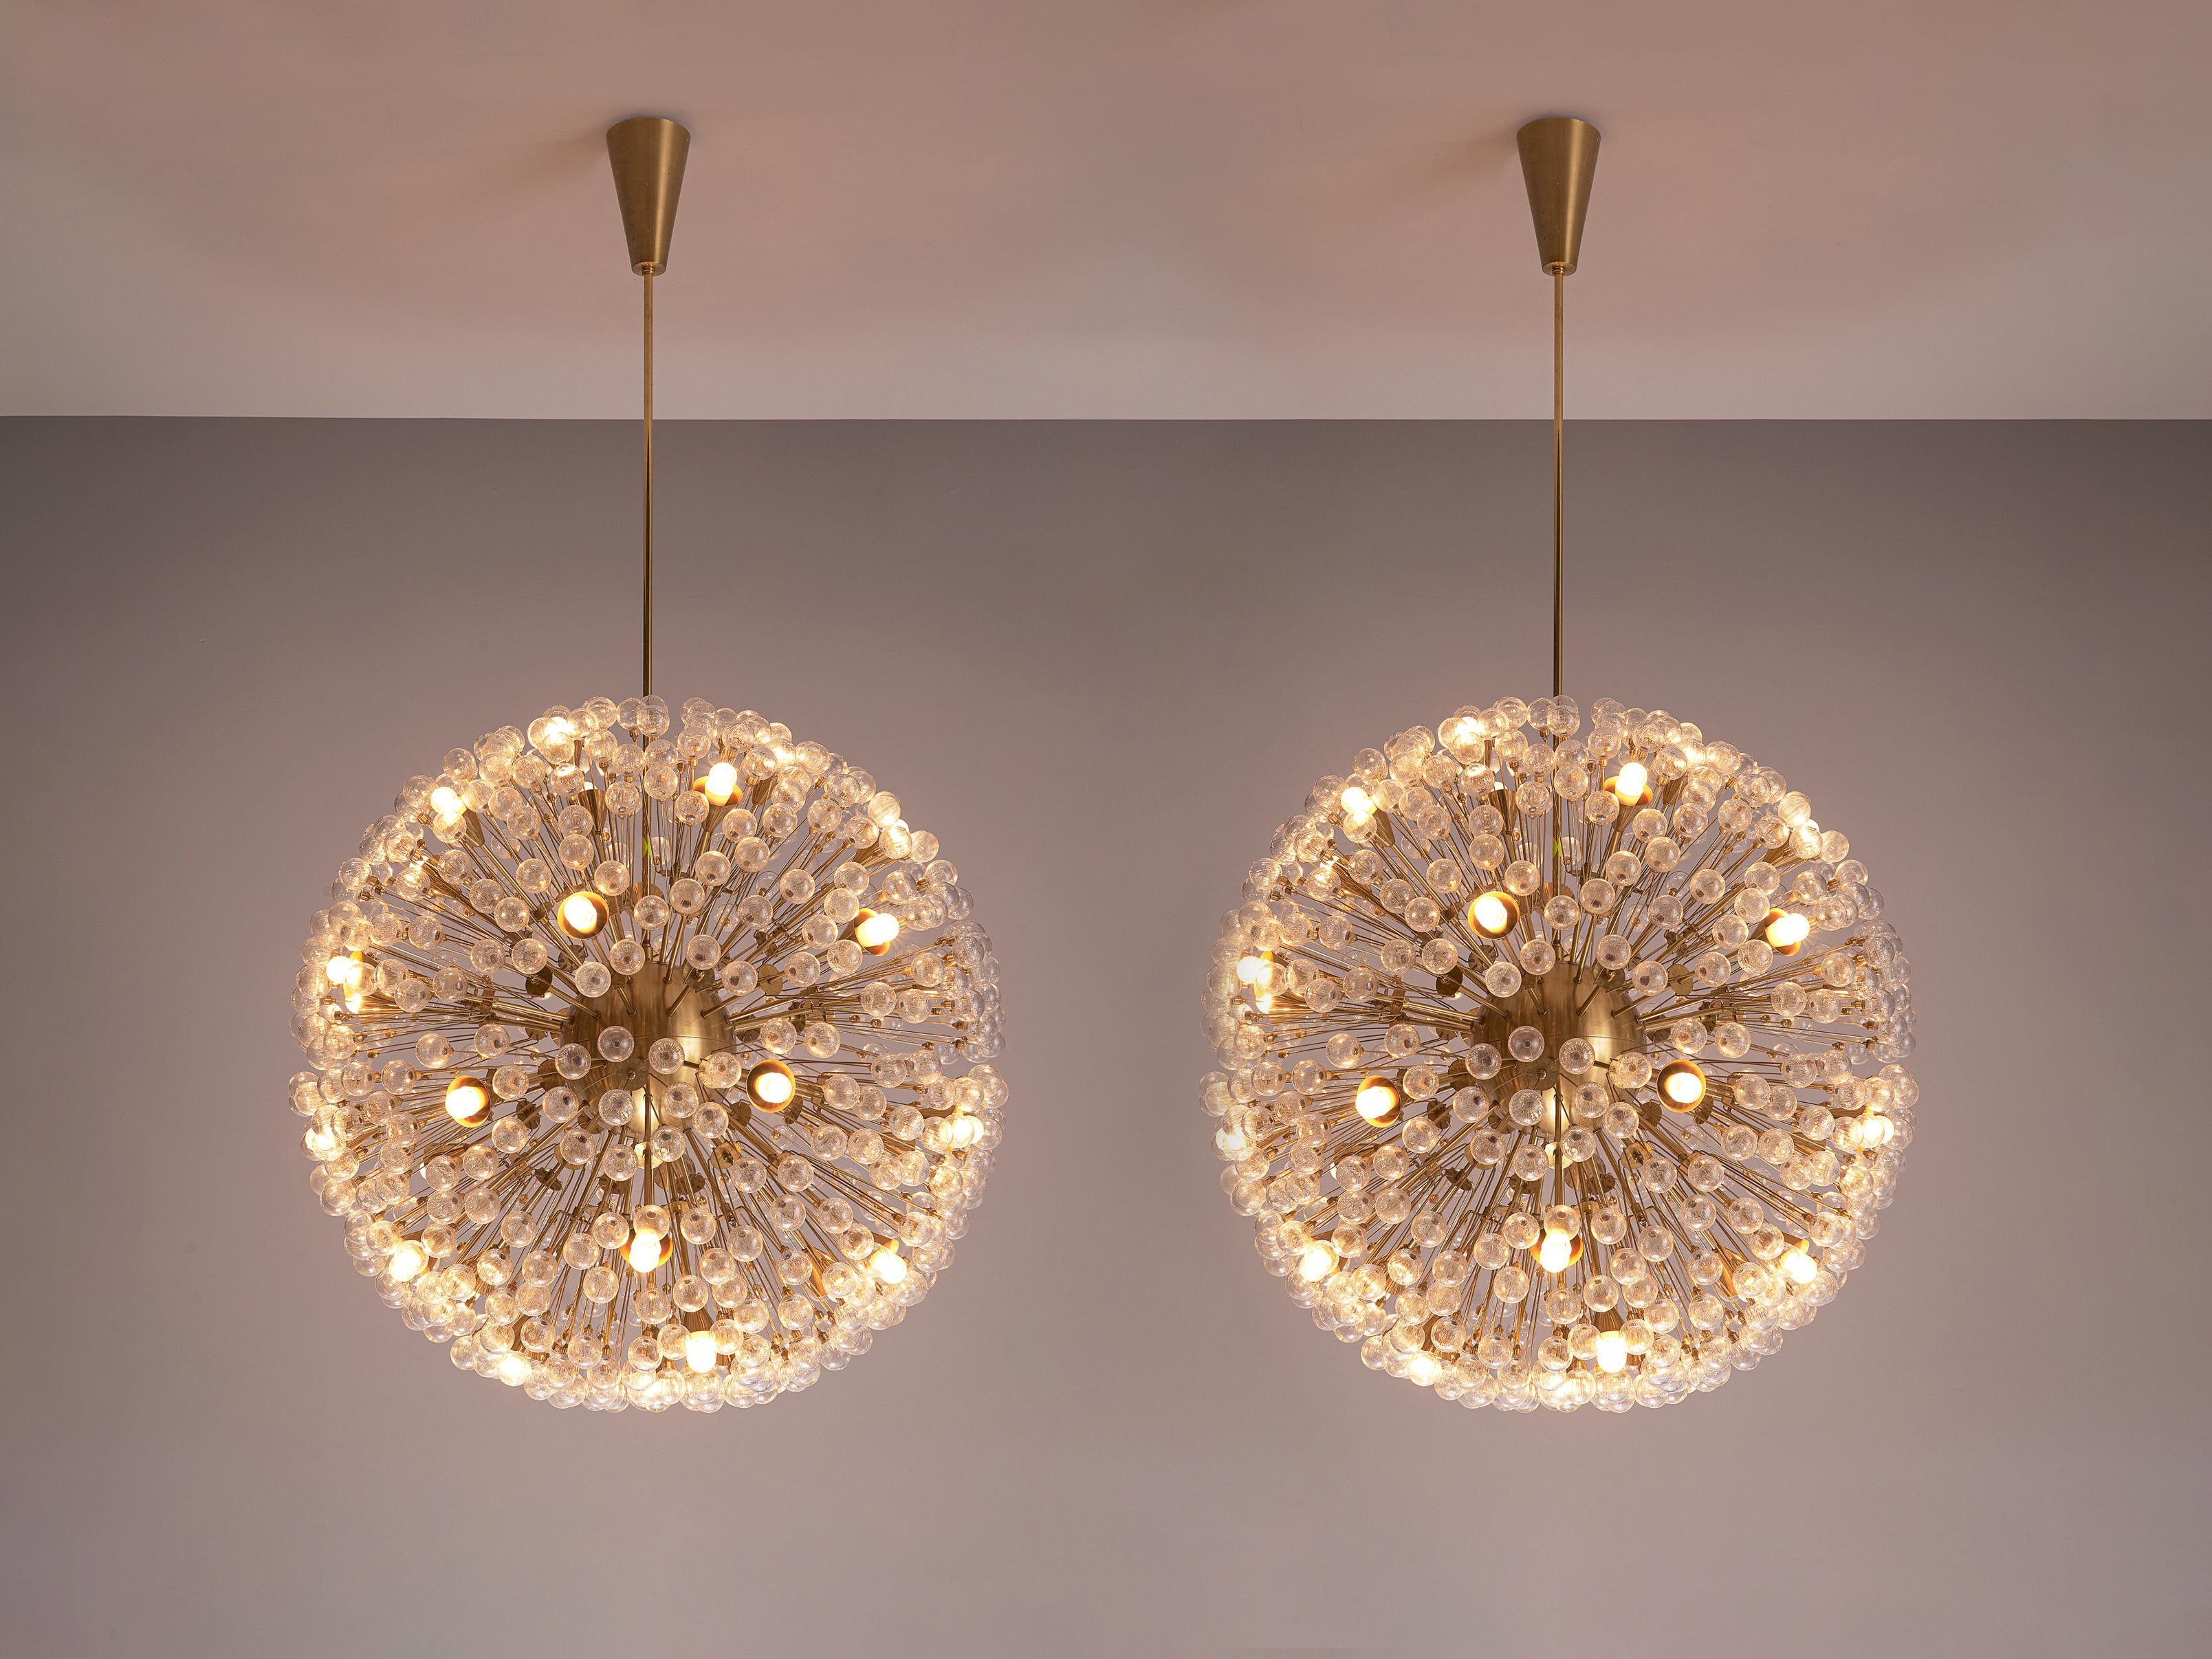 'Sputnik' chandeliers, brass, glass, Austria, 1960s

Beautiful and sizeable 'Sputnik' chandeliers made in Austria in the 1960s. These lights consist of a center sphere from which many rods with glass spheres at each end are held. The small spheres